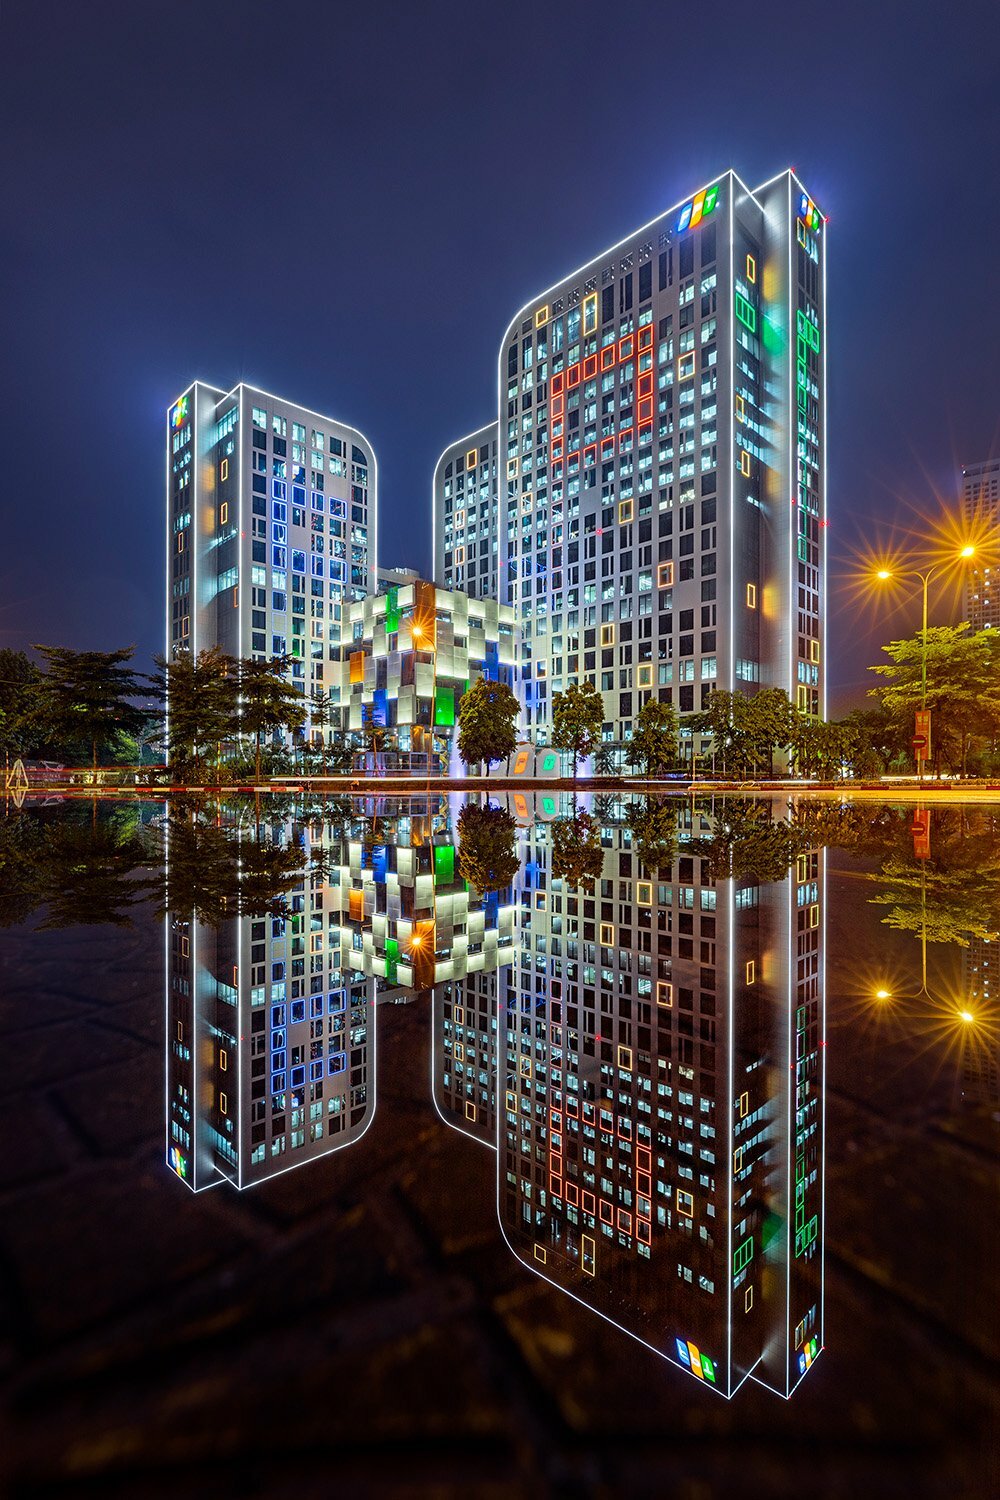 FPT Tower - Photographer Name: Khanh Le Viet - Hanoi FPT Corporation's building reflected on the street, on a rainy night.